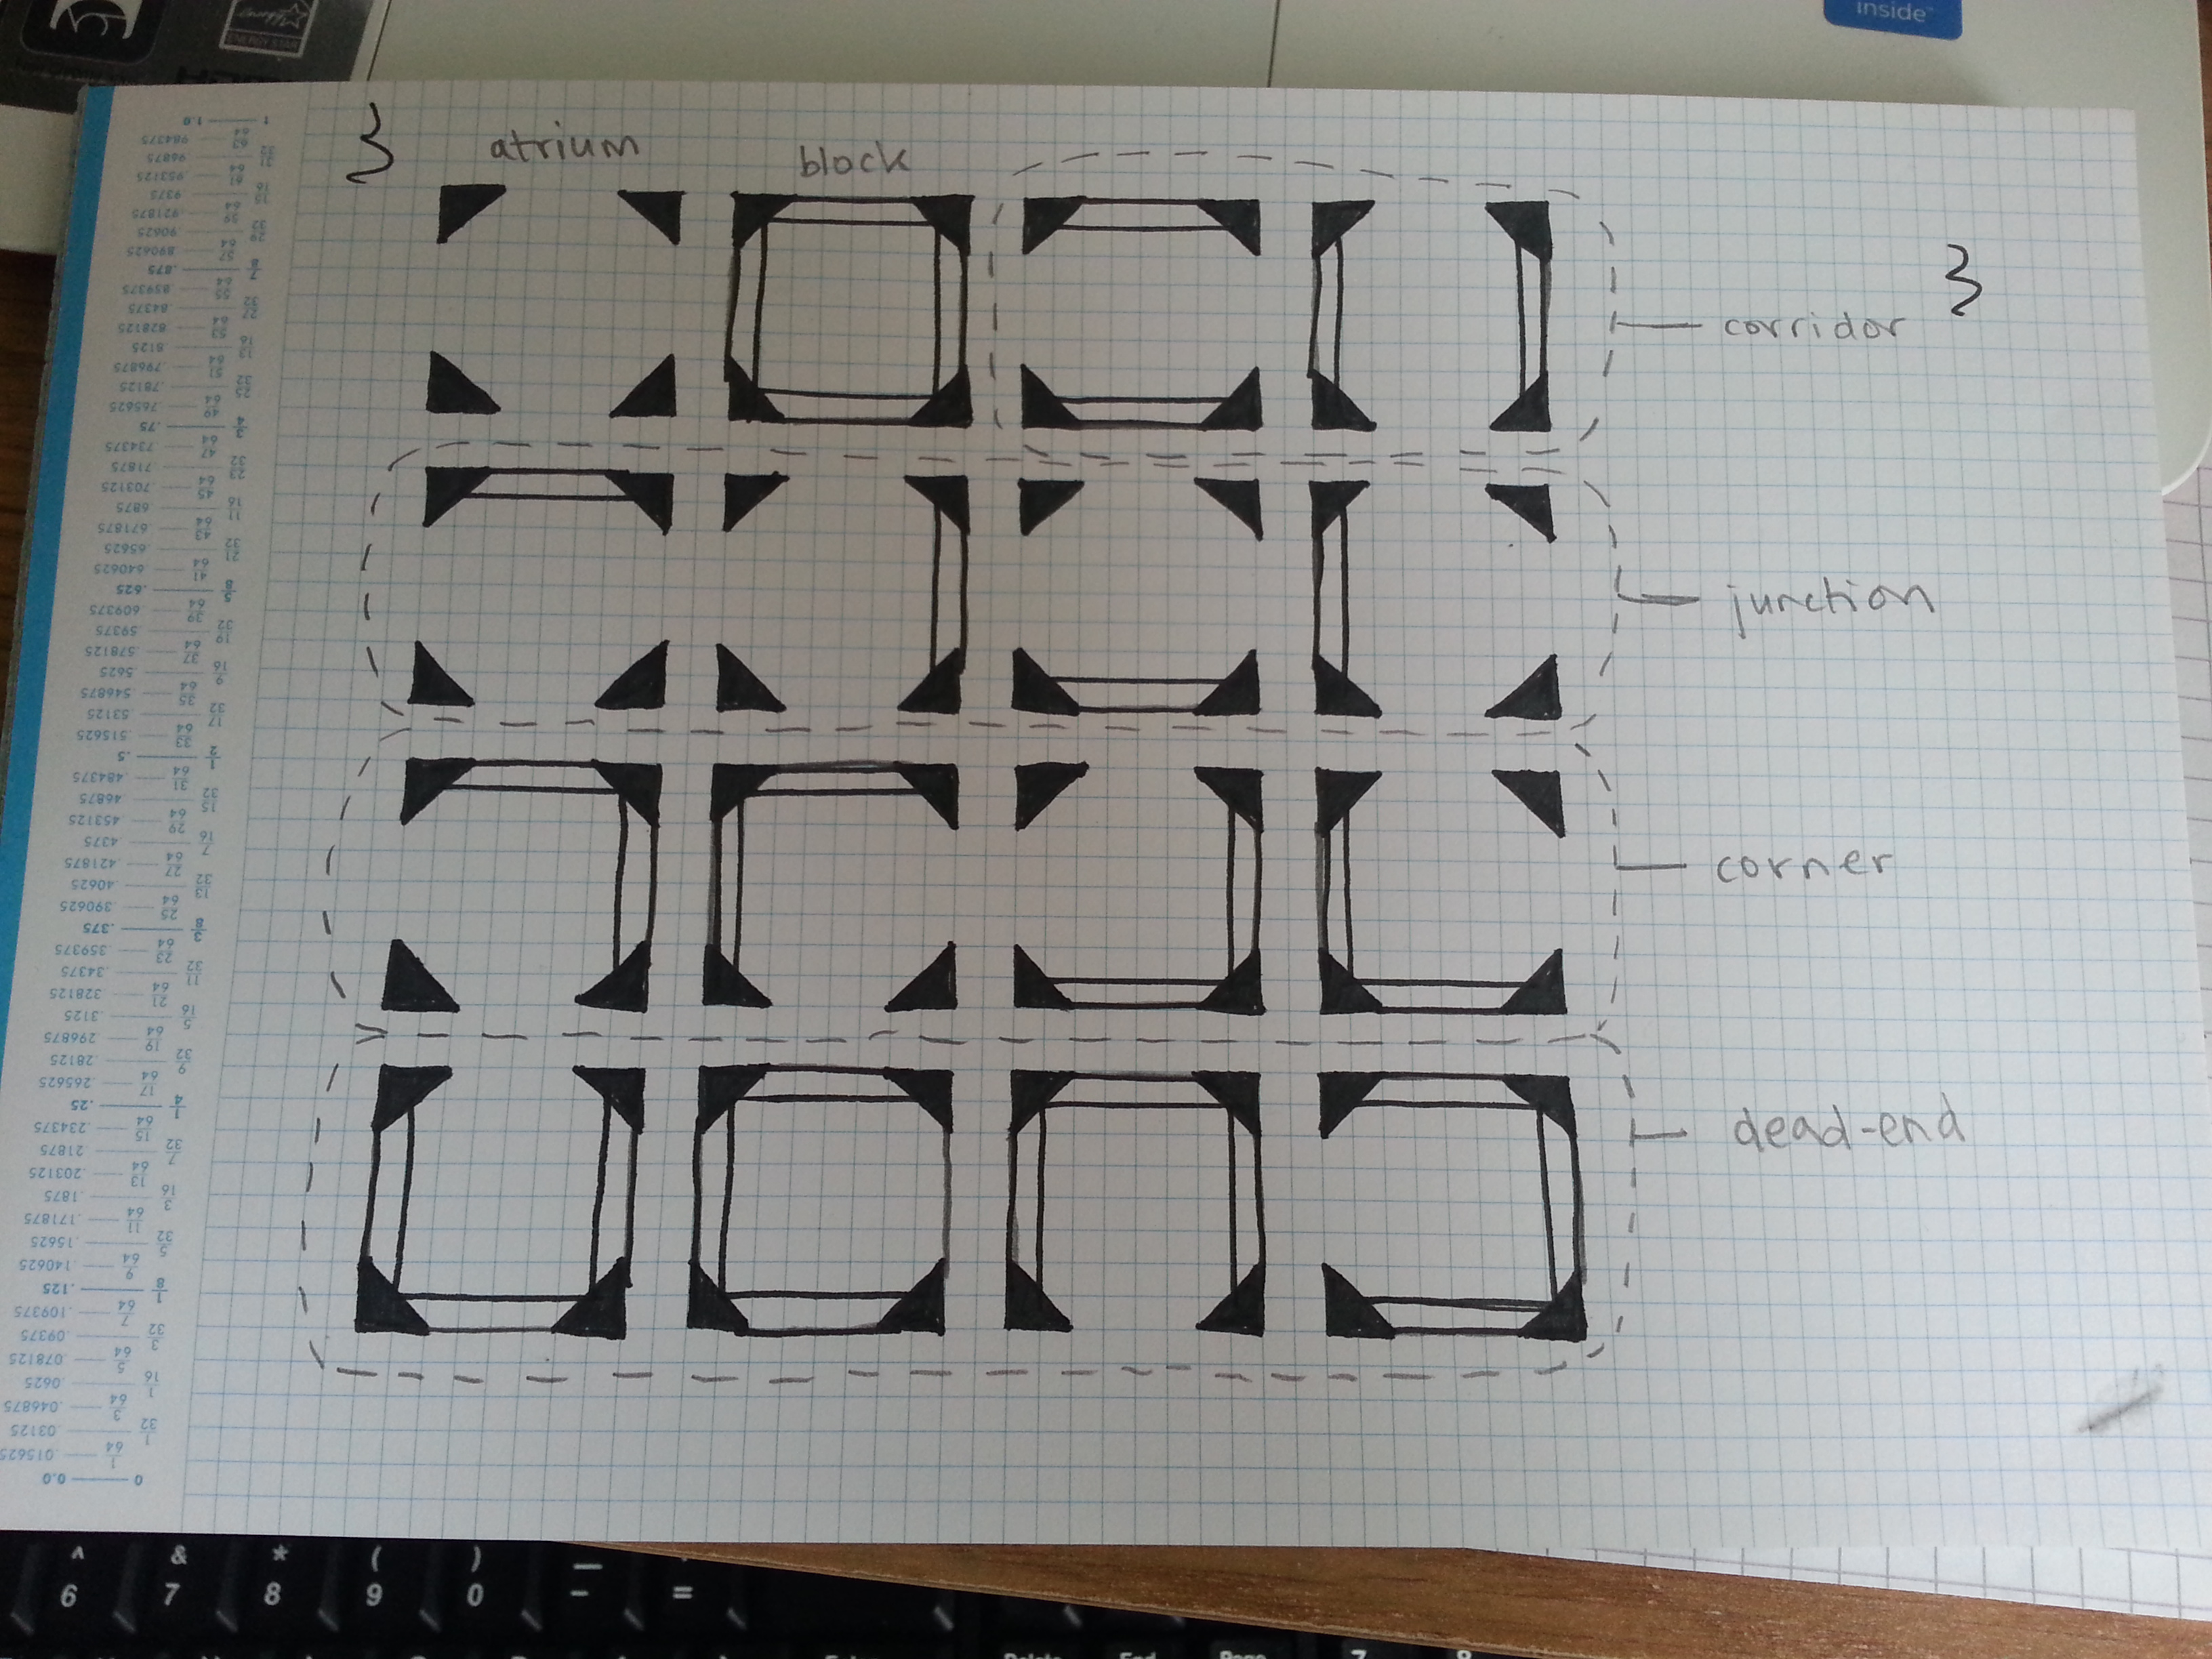 I drew out the groups of possible square tiles for this post to make them seem more tangible. Normally though, I'd just keep this visualisation in my head or scribble some sketches in a notebook.